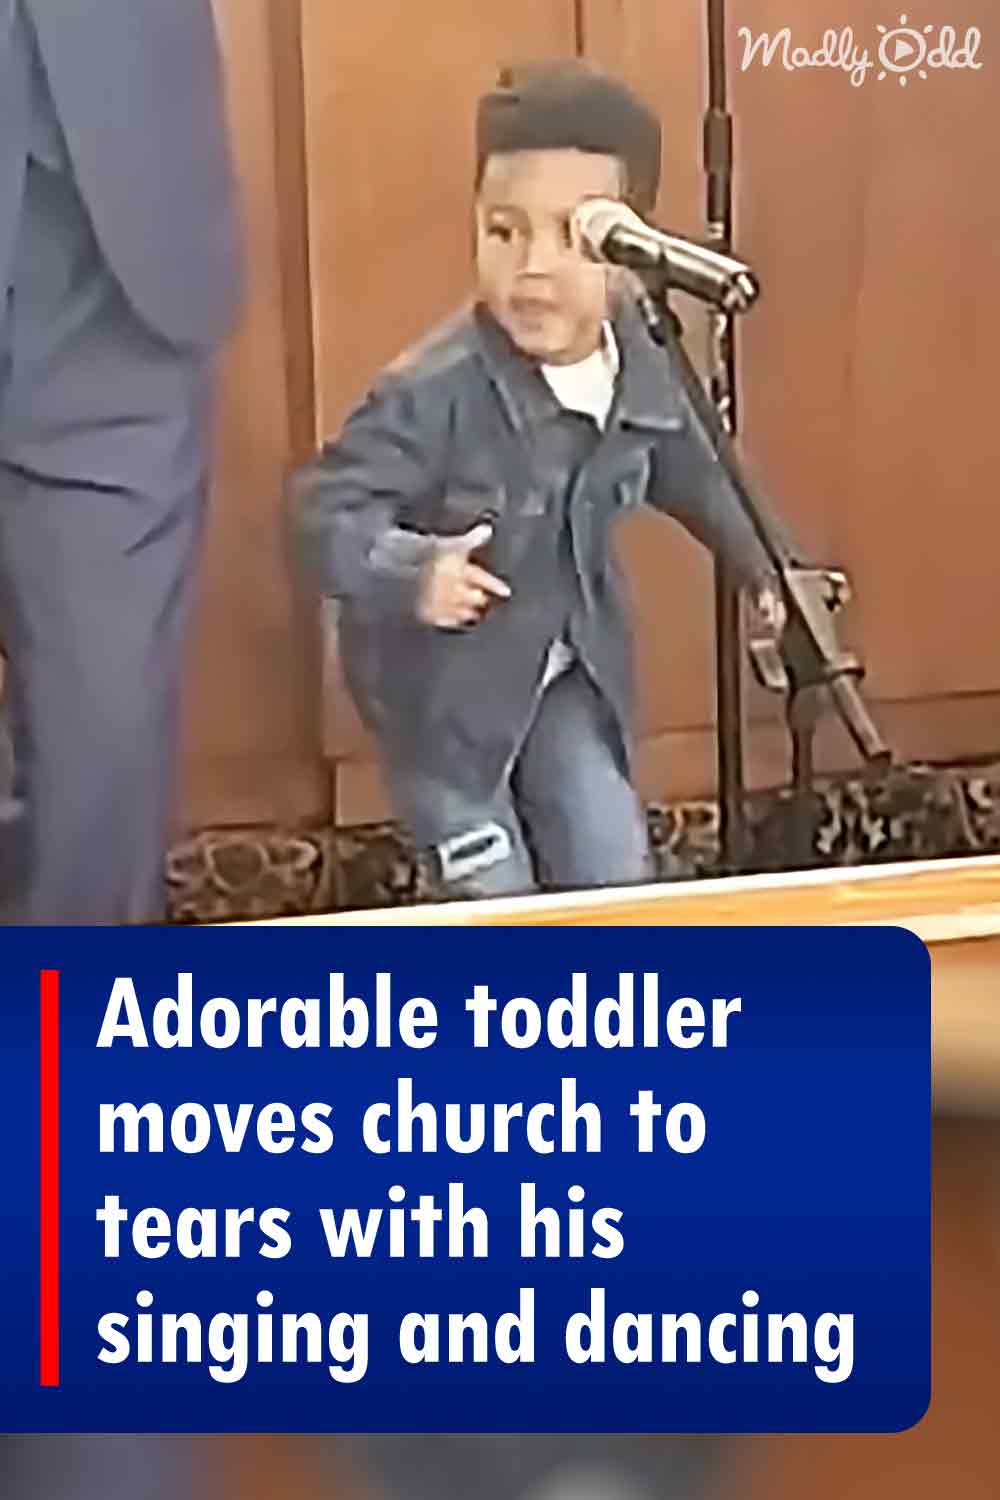 Adorable toddler moves church to tears with his singing and dancing